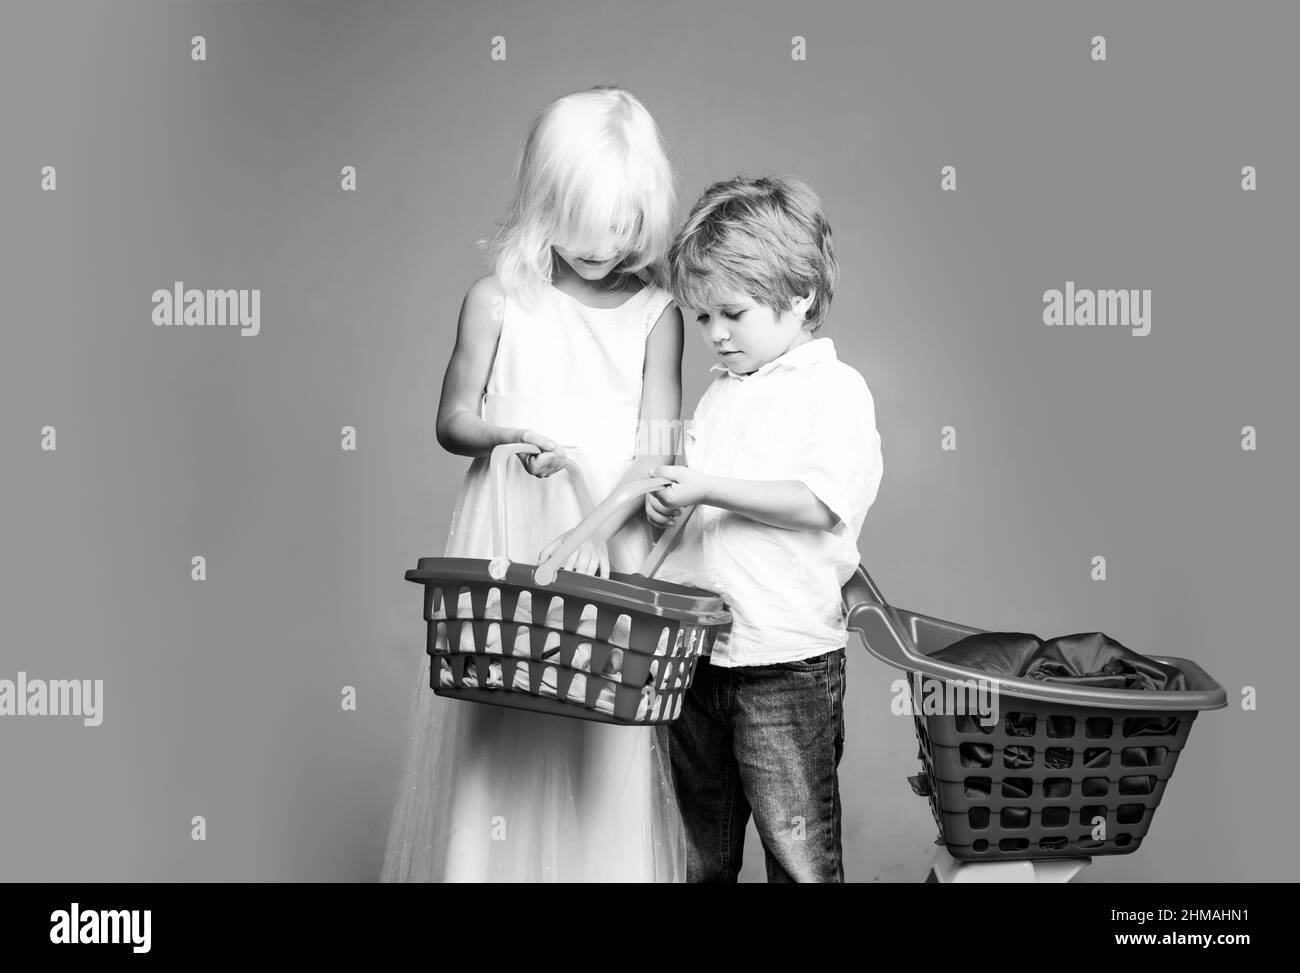 Mall shopping. Buy products. Play shop game. Cute buyer customer client hold shopping cart. Girl and boy children shopping. Kids store. Couple kids Stock Photo